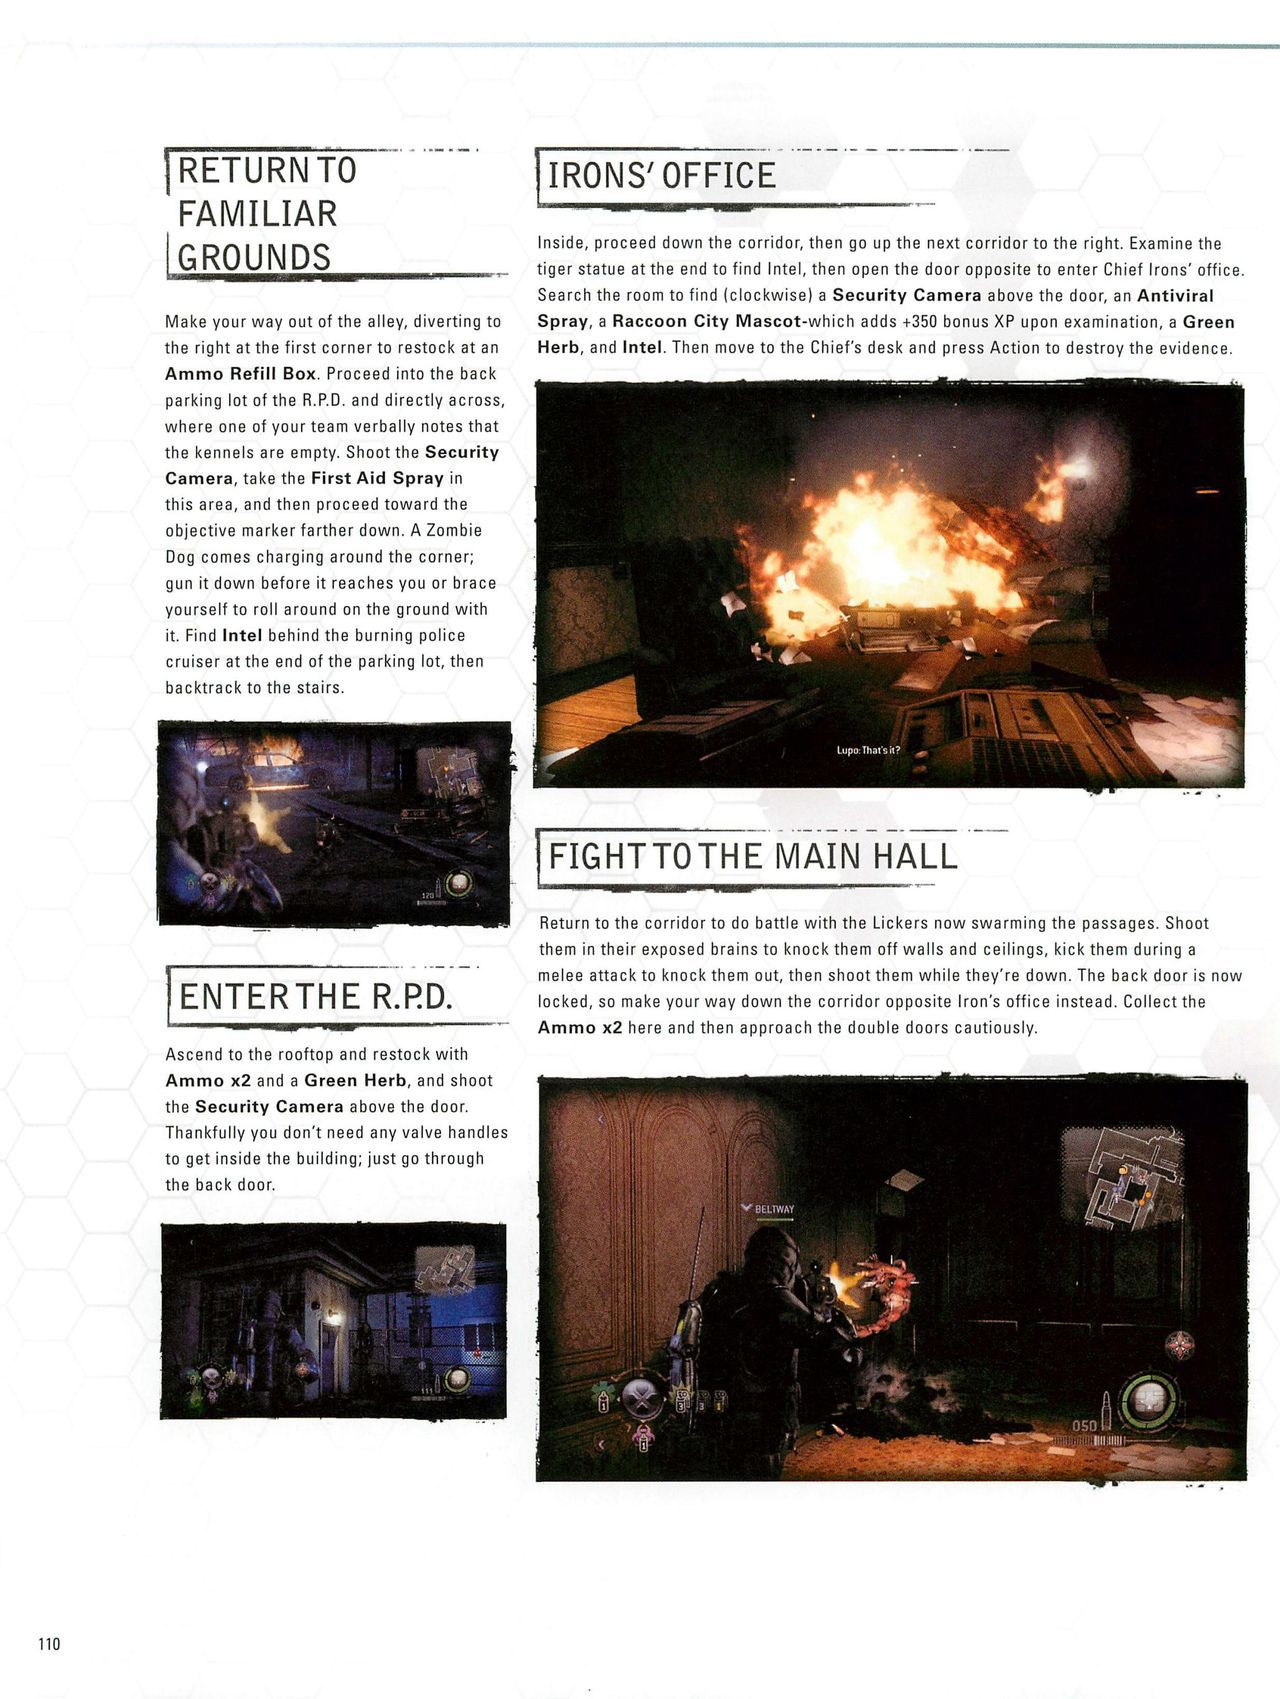 Resident Evil: Operation Raccoon City Official Strategy Guide (watermarked) 112